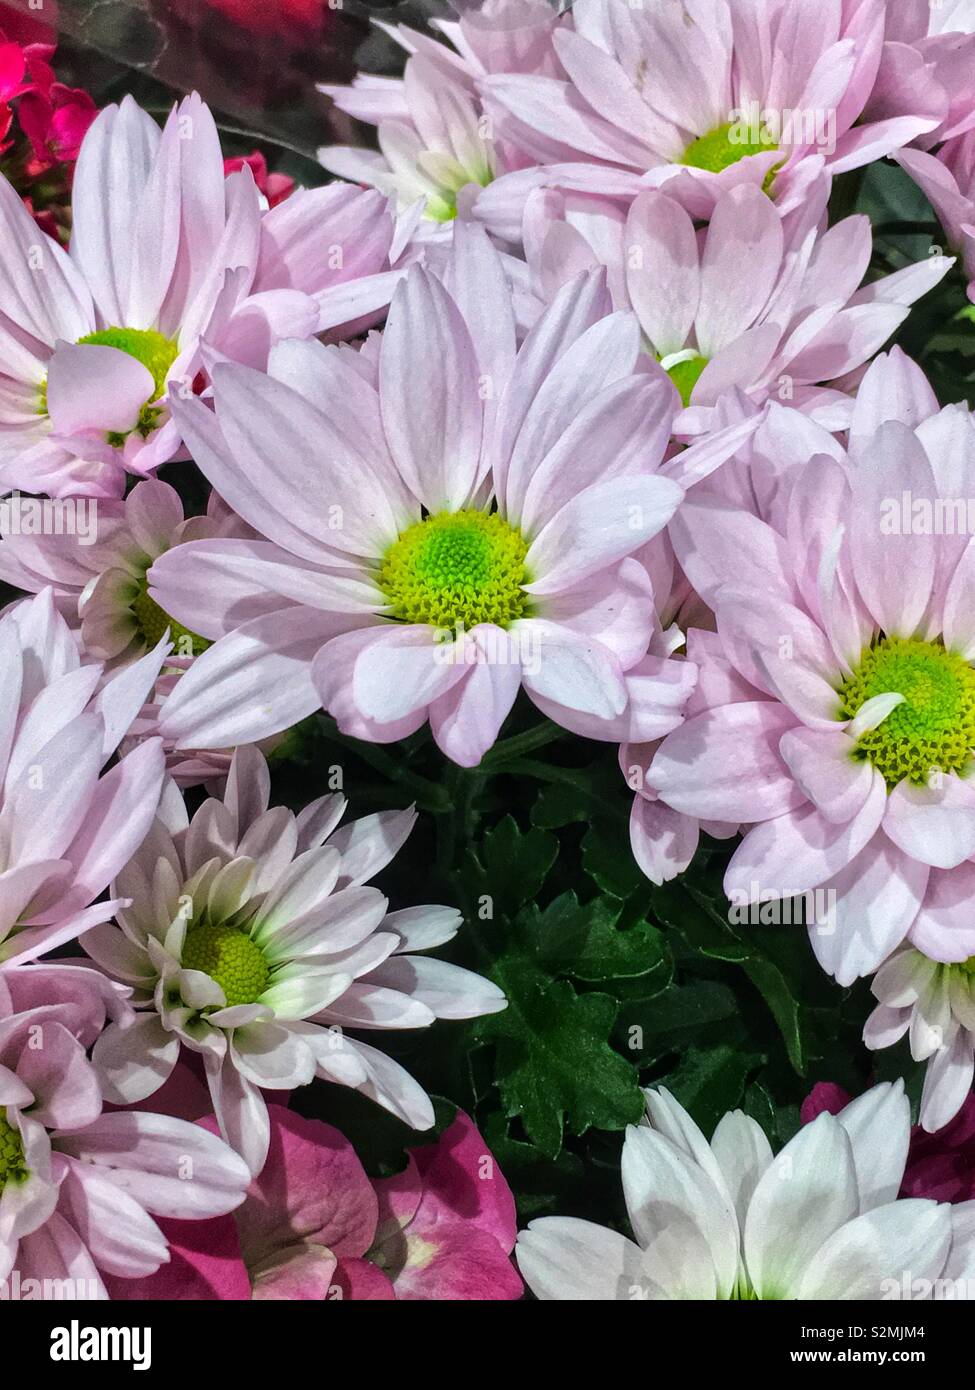 Spring flower bouquet of perfect fresh pink daisies. Stock Photo